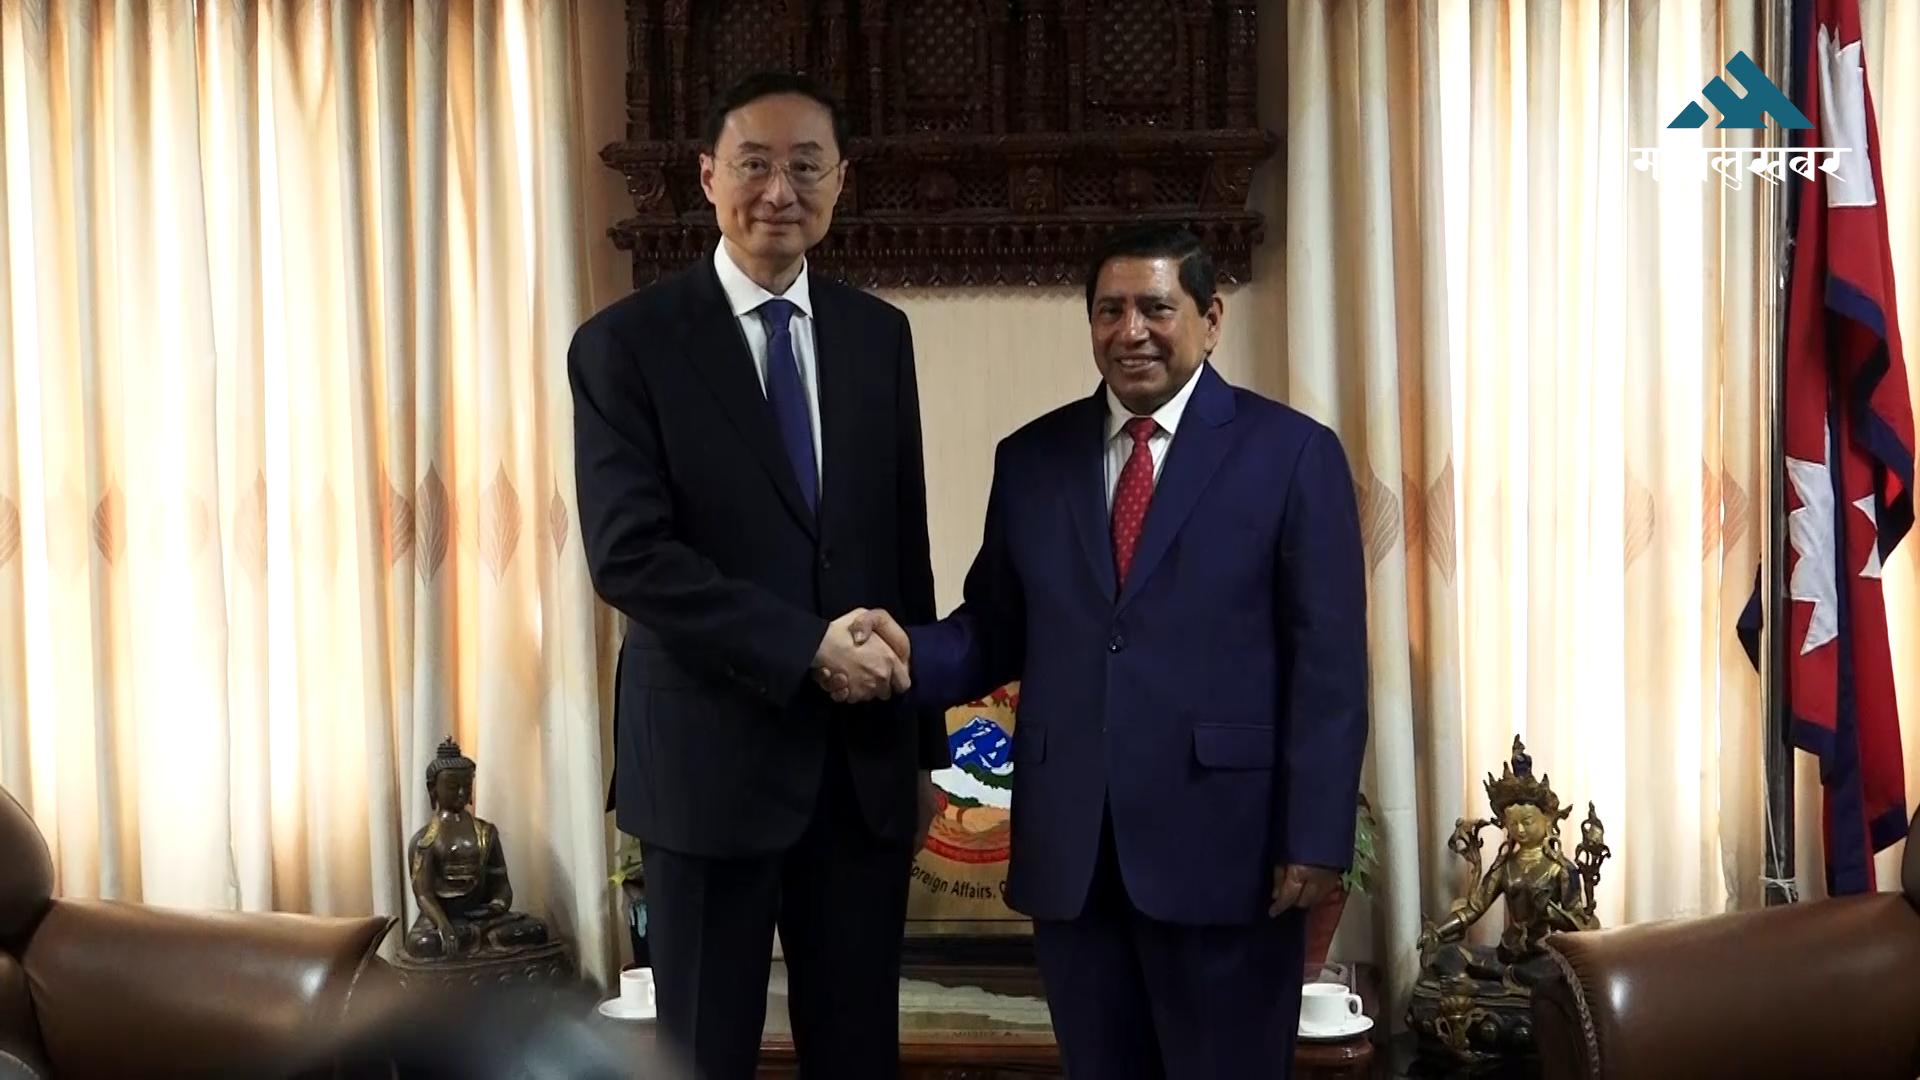 Foreign Minister Shrestha & Chinese Vice Foreign Minister Weidong met